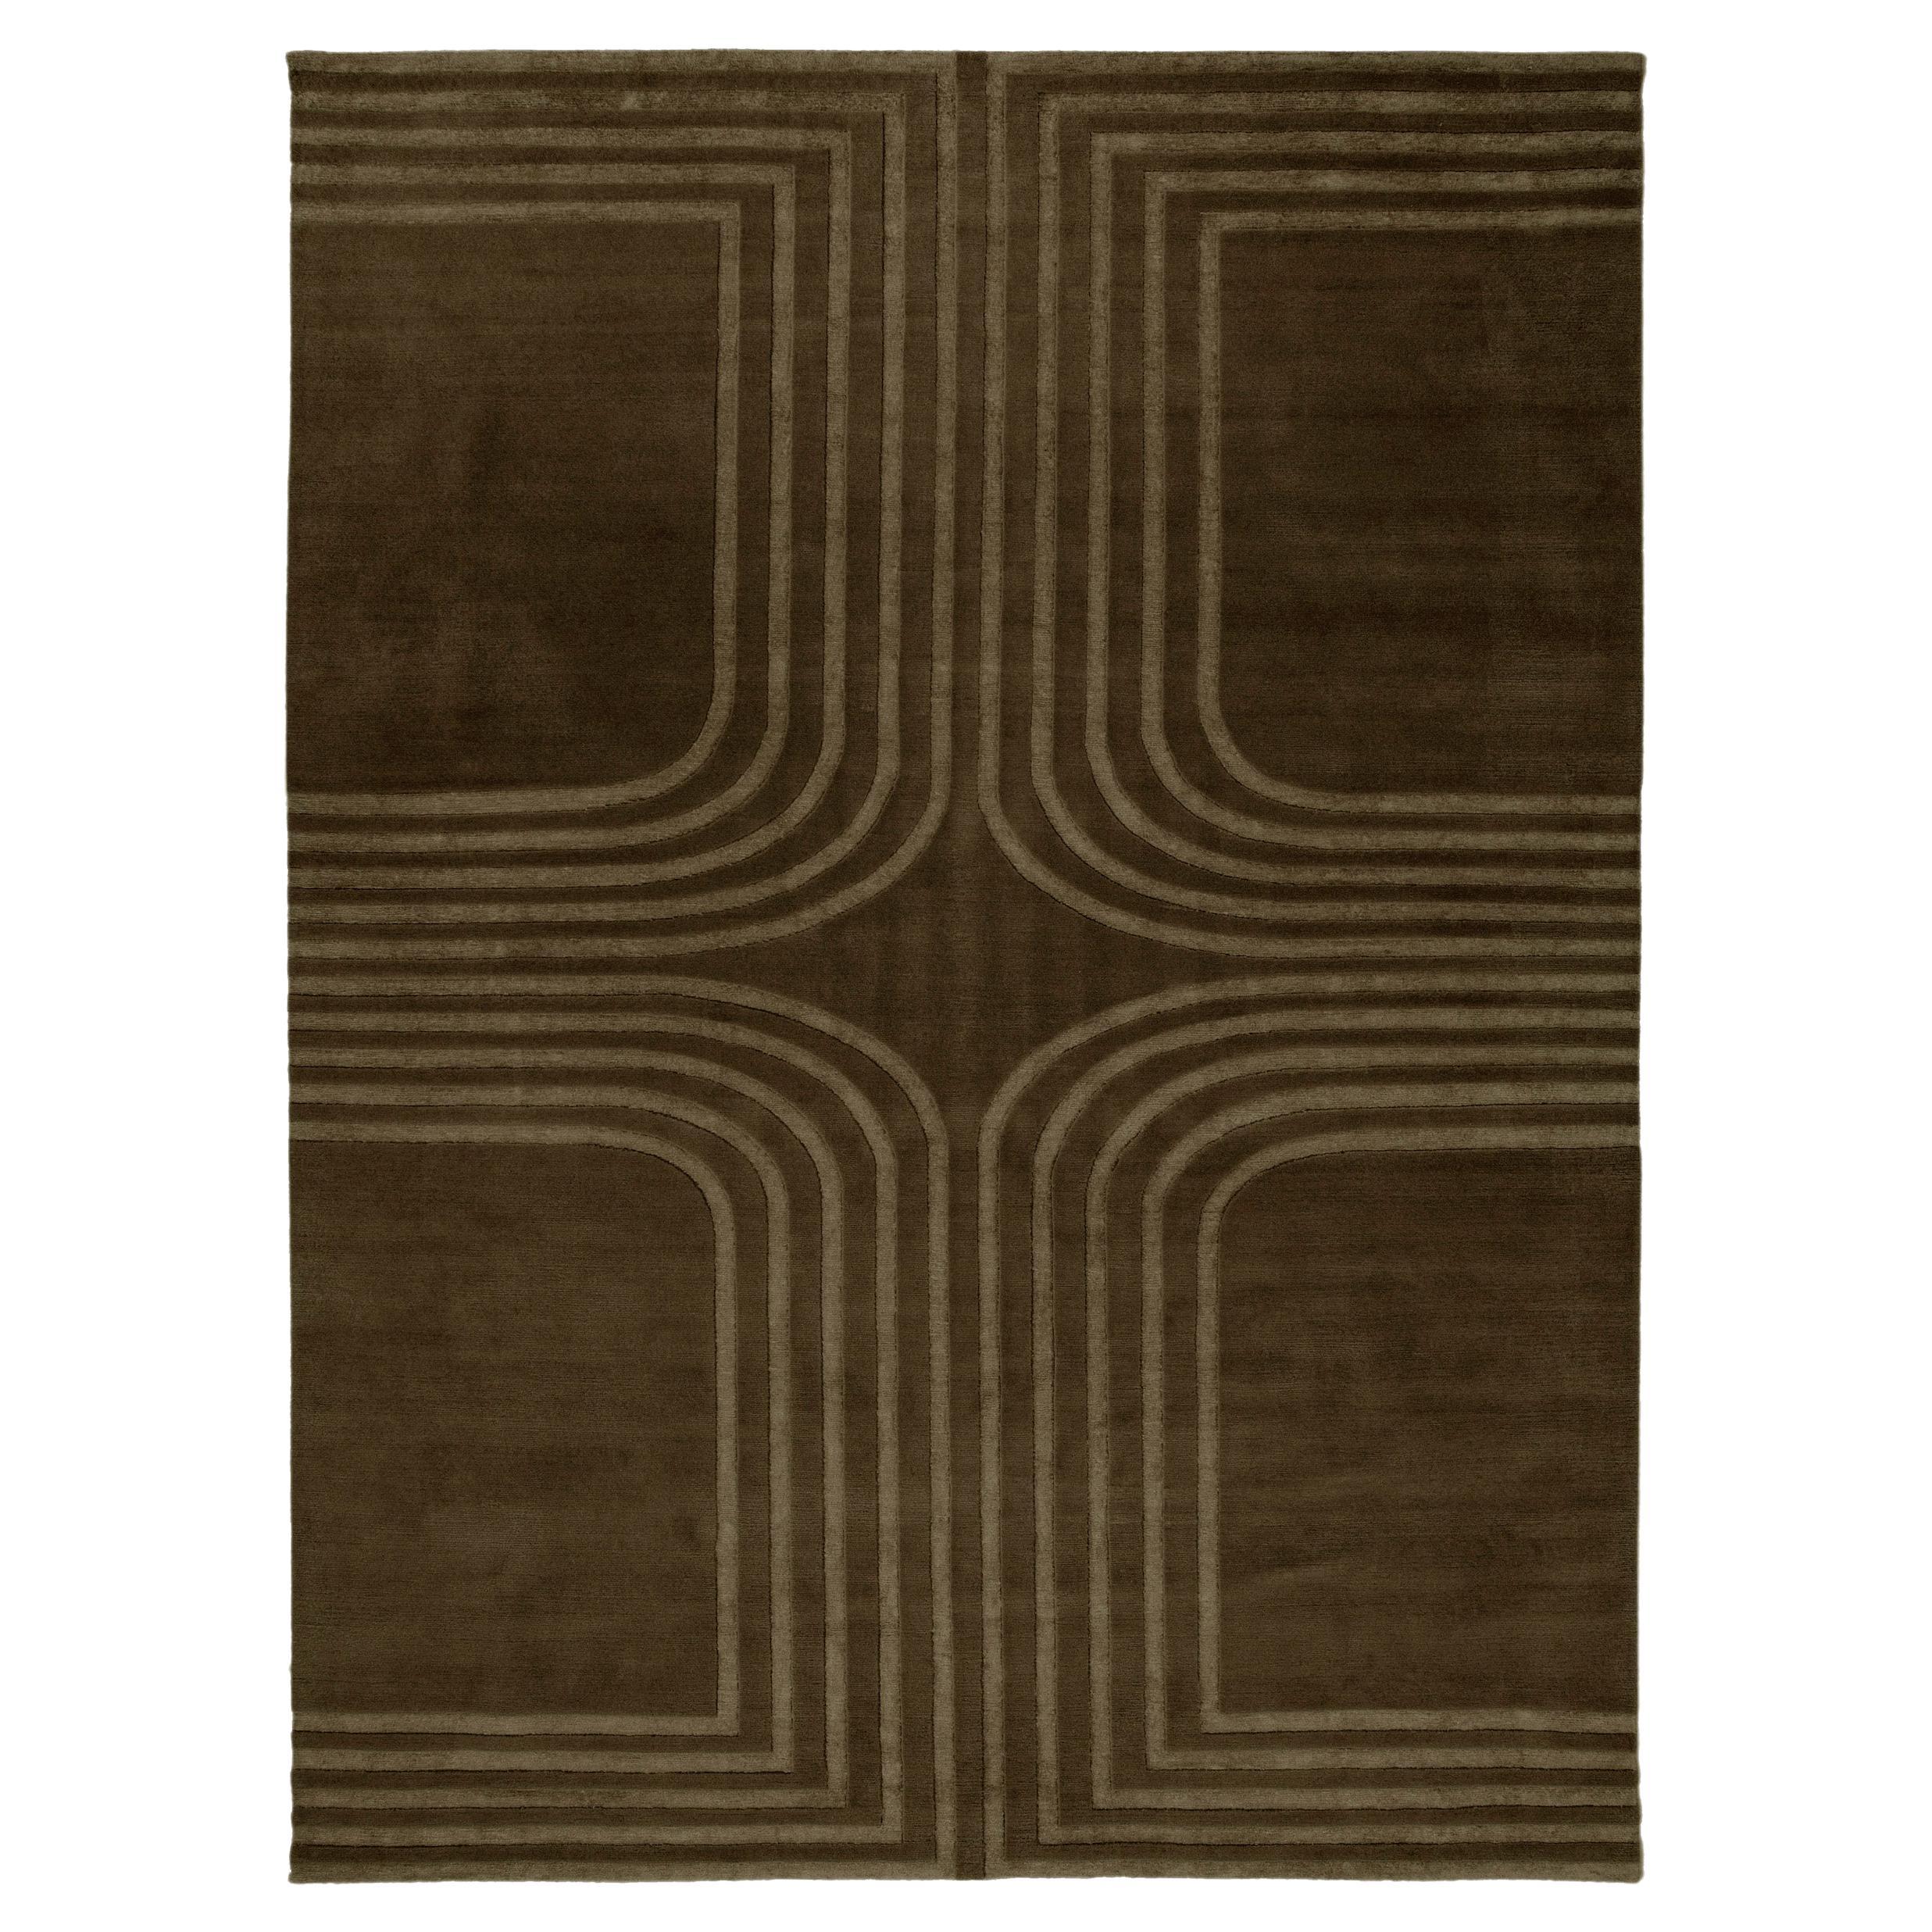 Handknotted wool rug Rilievo 01 by Tigmi
Dimensions: 270 x 180 
Materials: wool, linen
Available in different colors.

Tigmi Trading are a certified Good Weave partner, a non-profit organization that works to end child labour in the rug